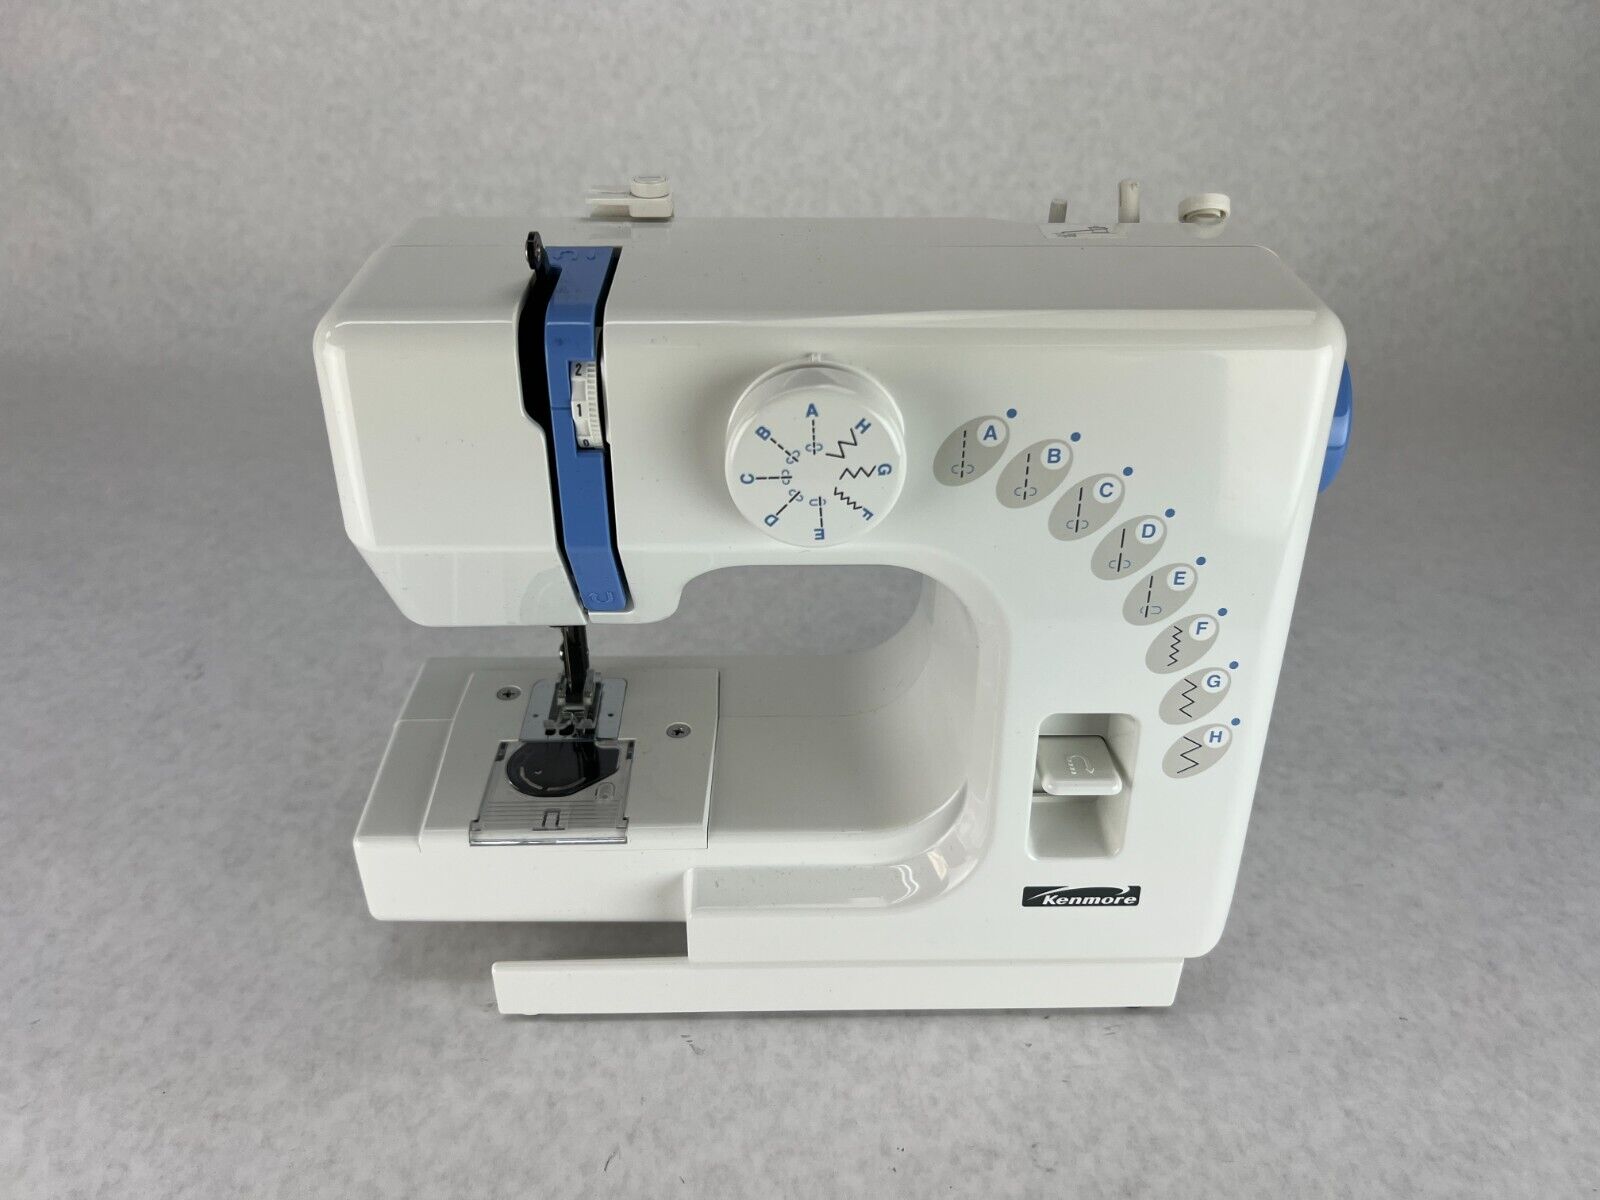 Buy the Sears Kenmore Sewing Machine